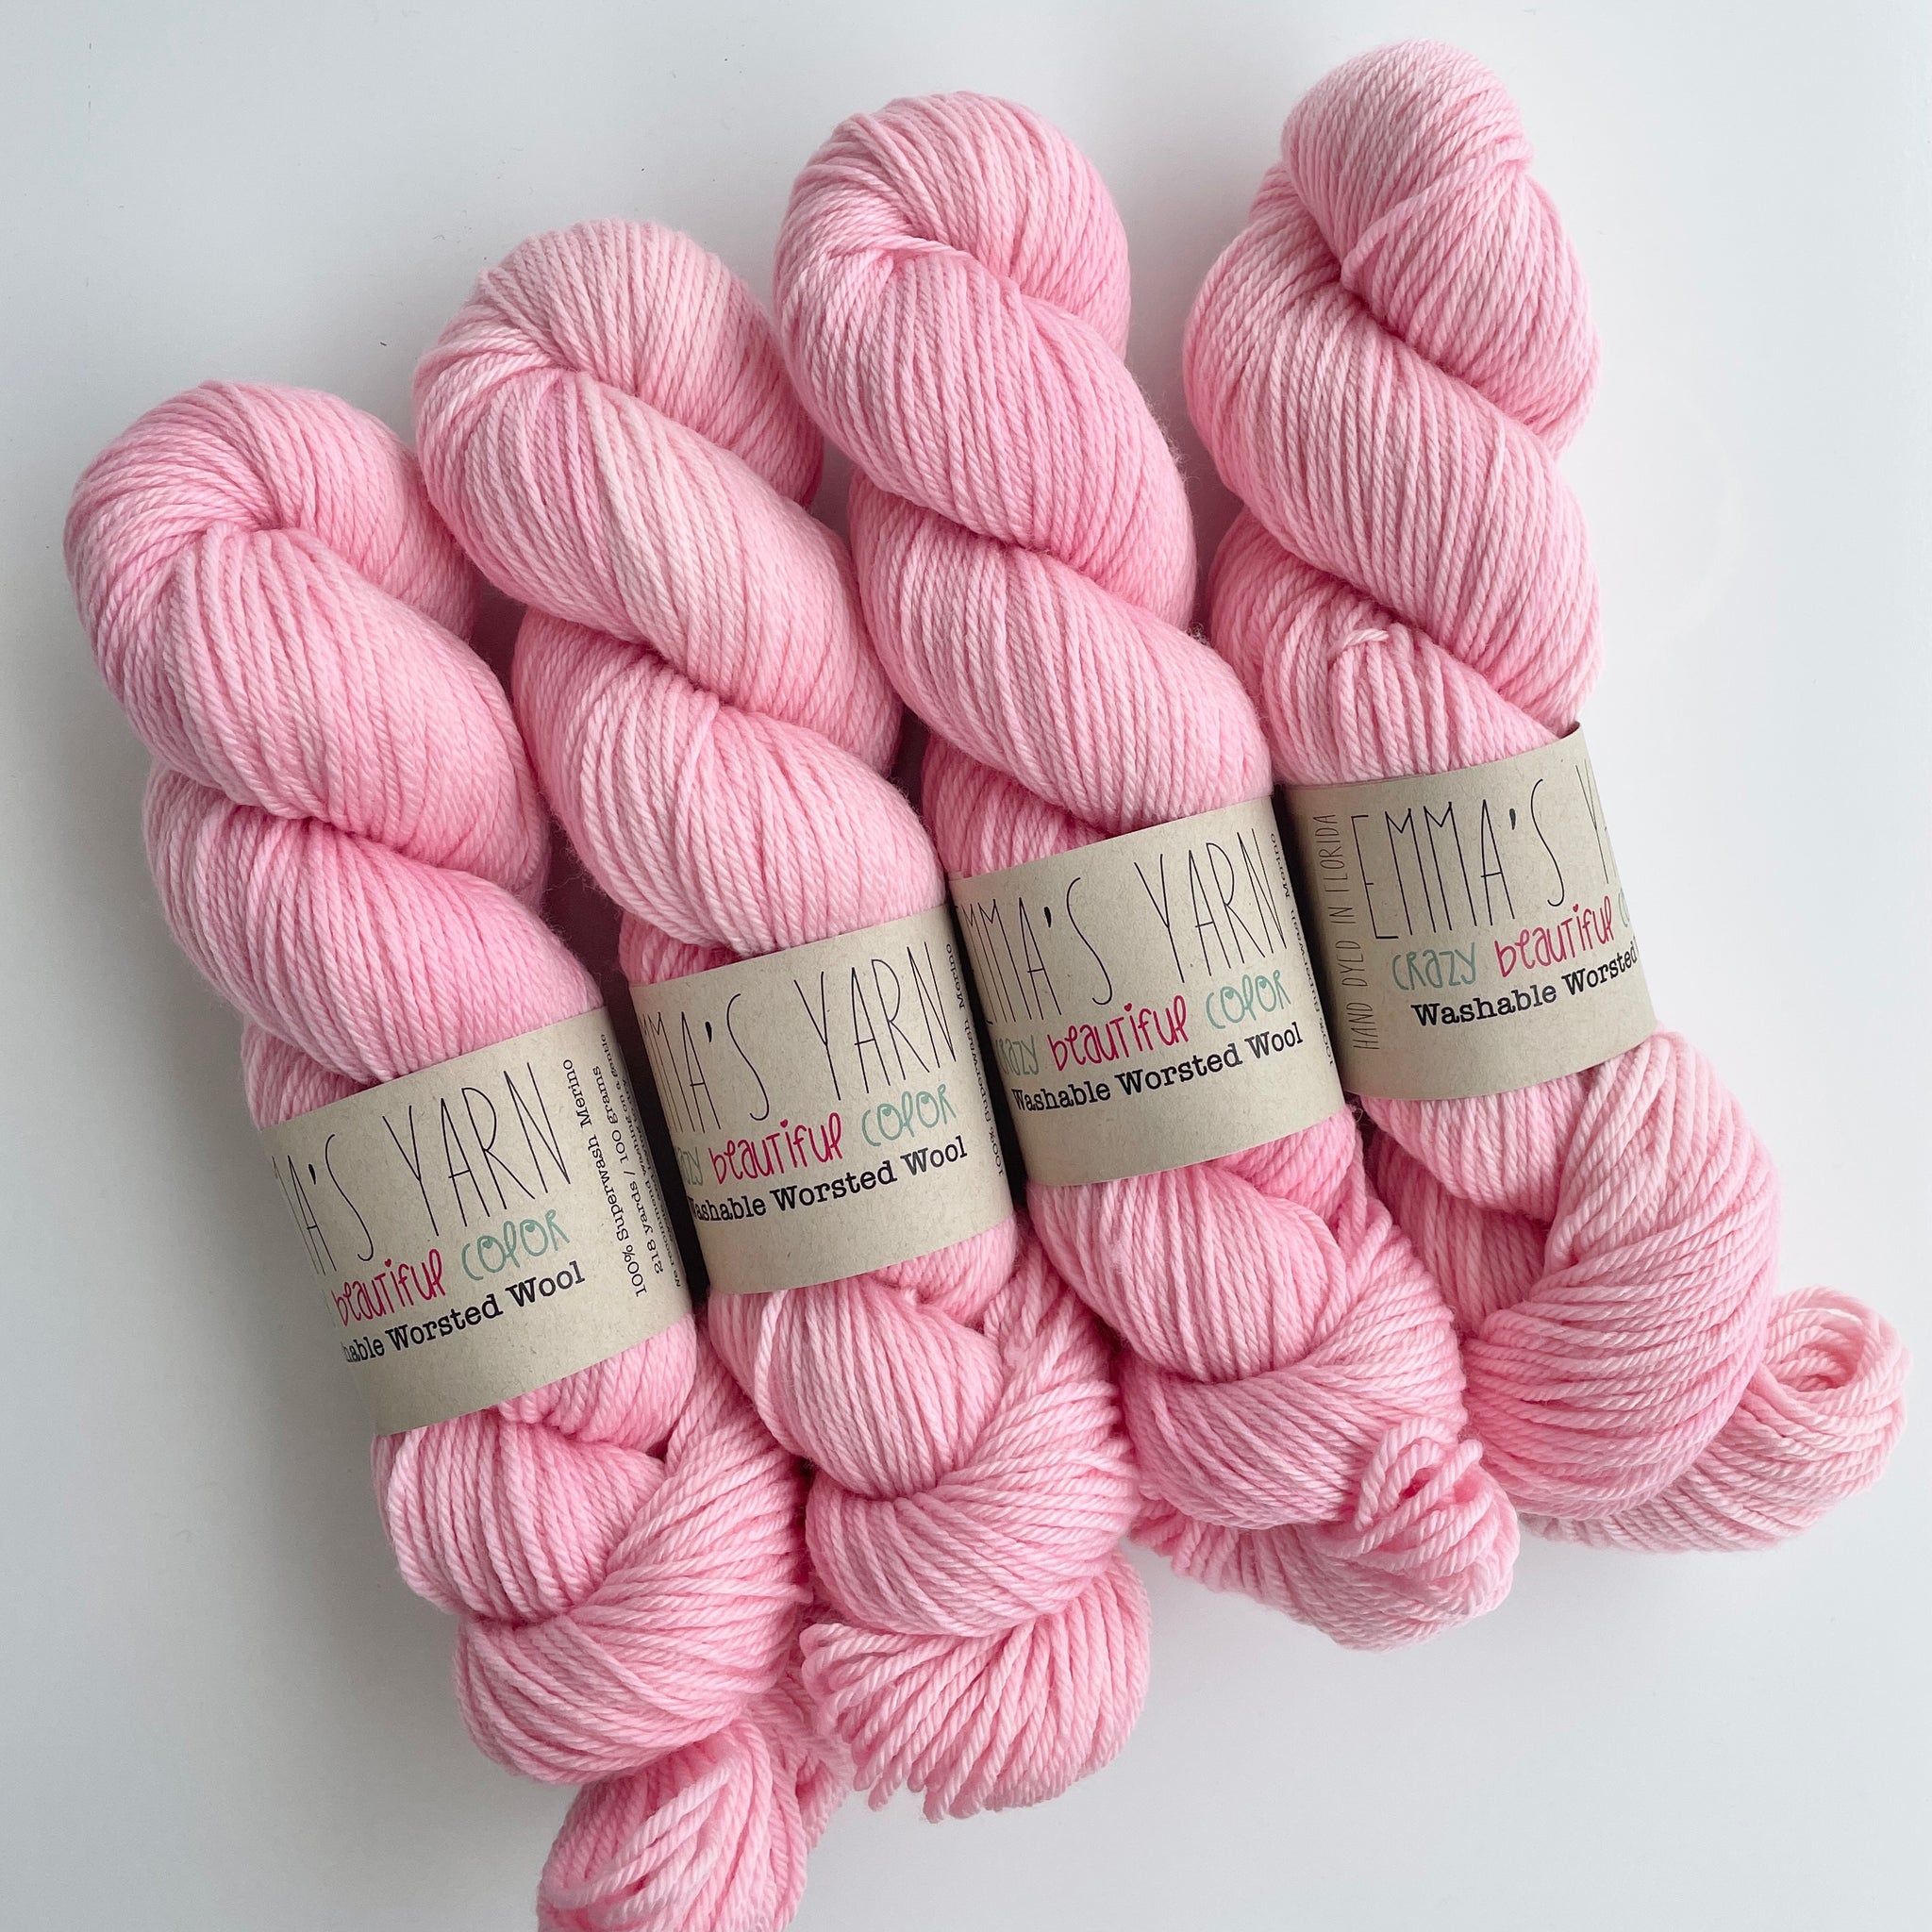 Poppin' - Washable Worsted Wool